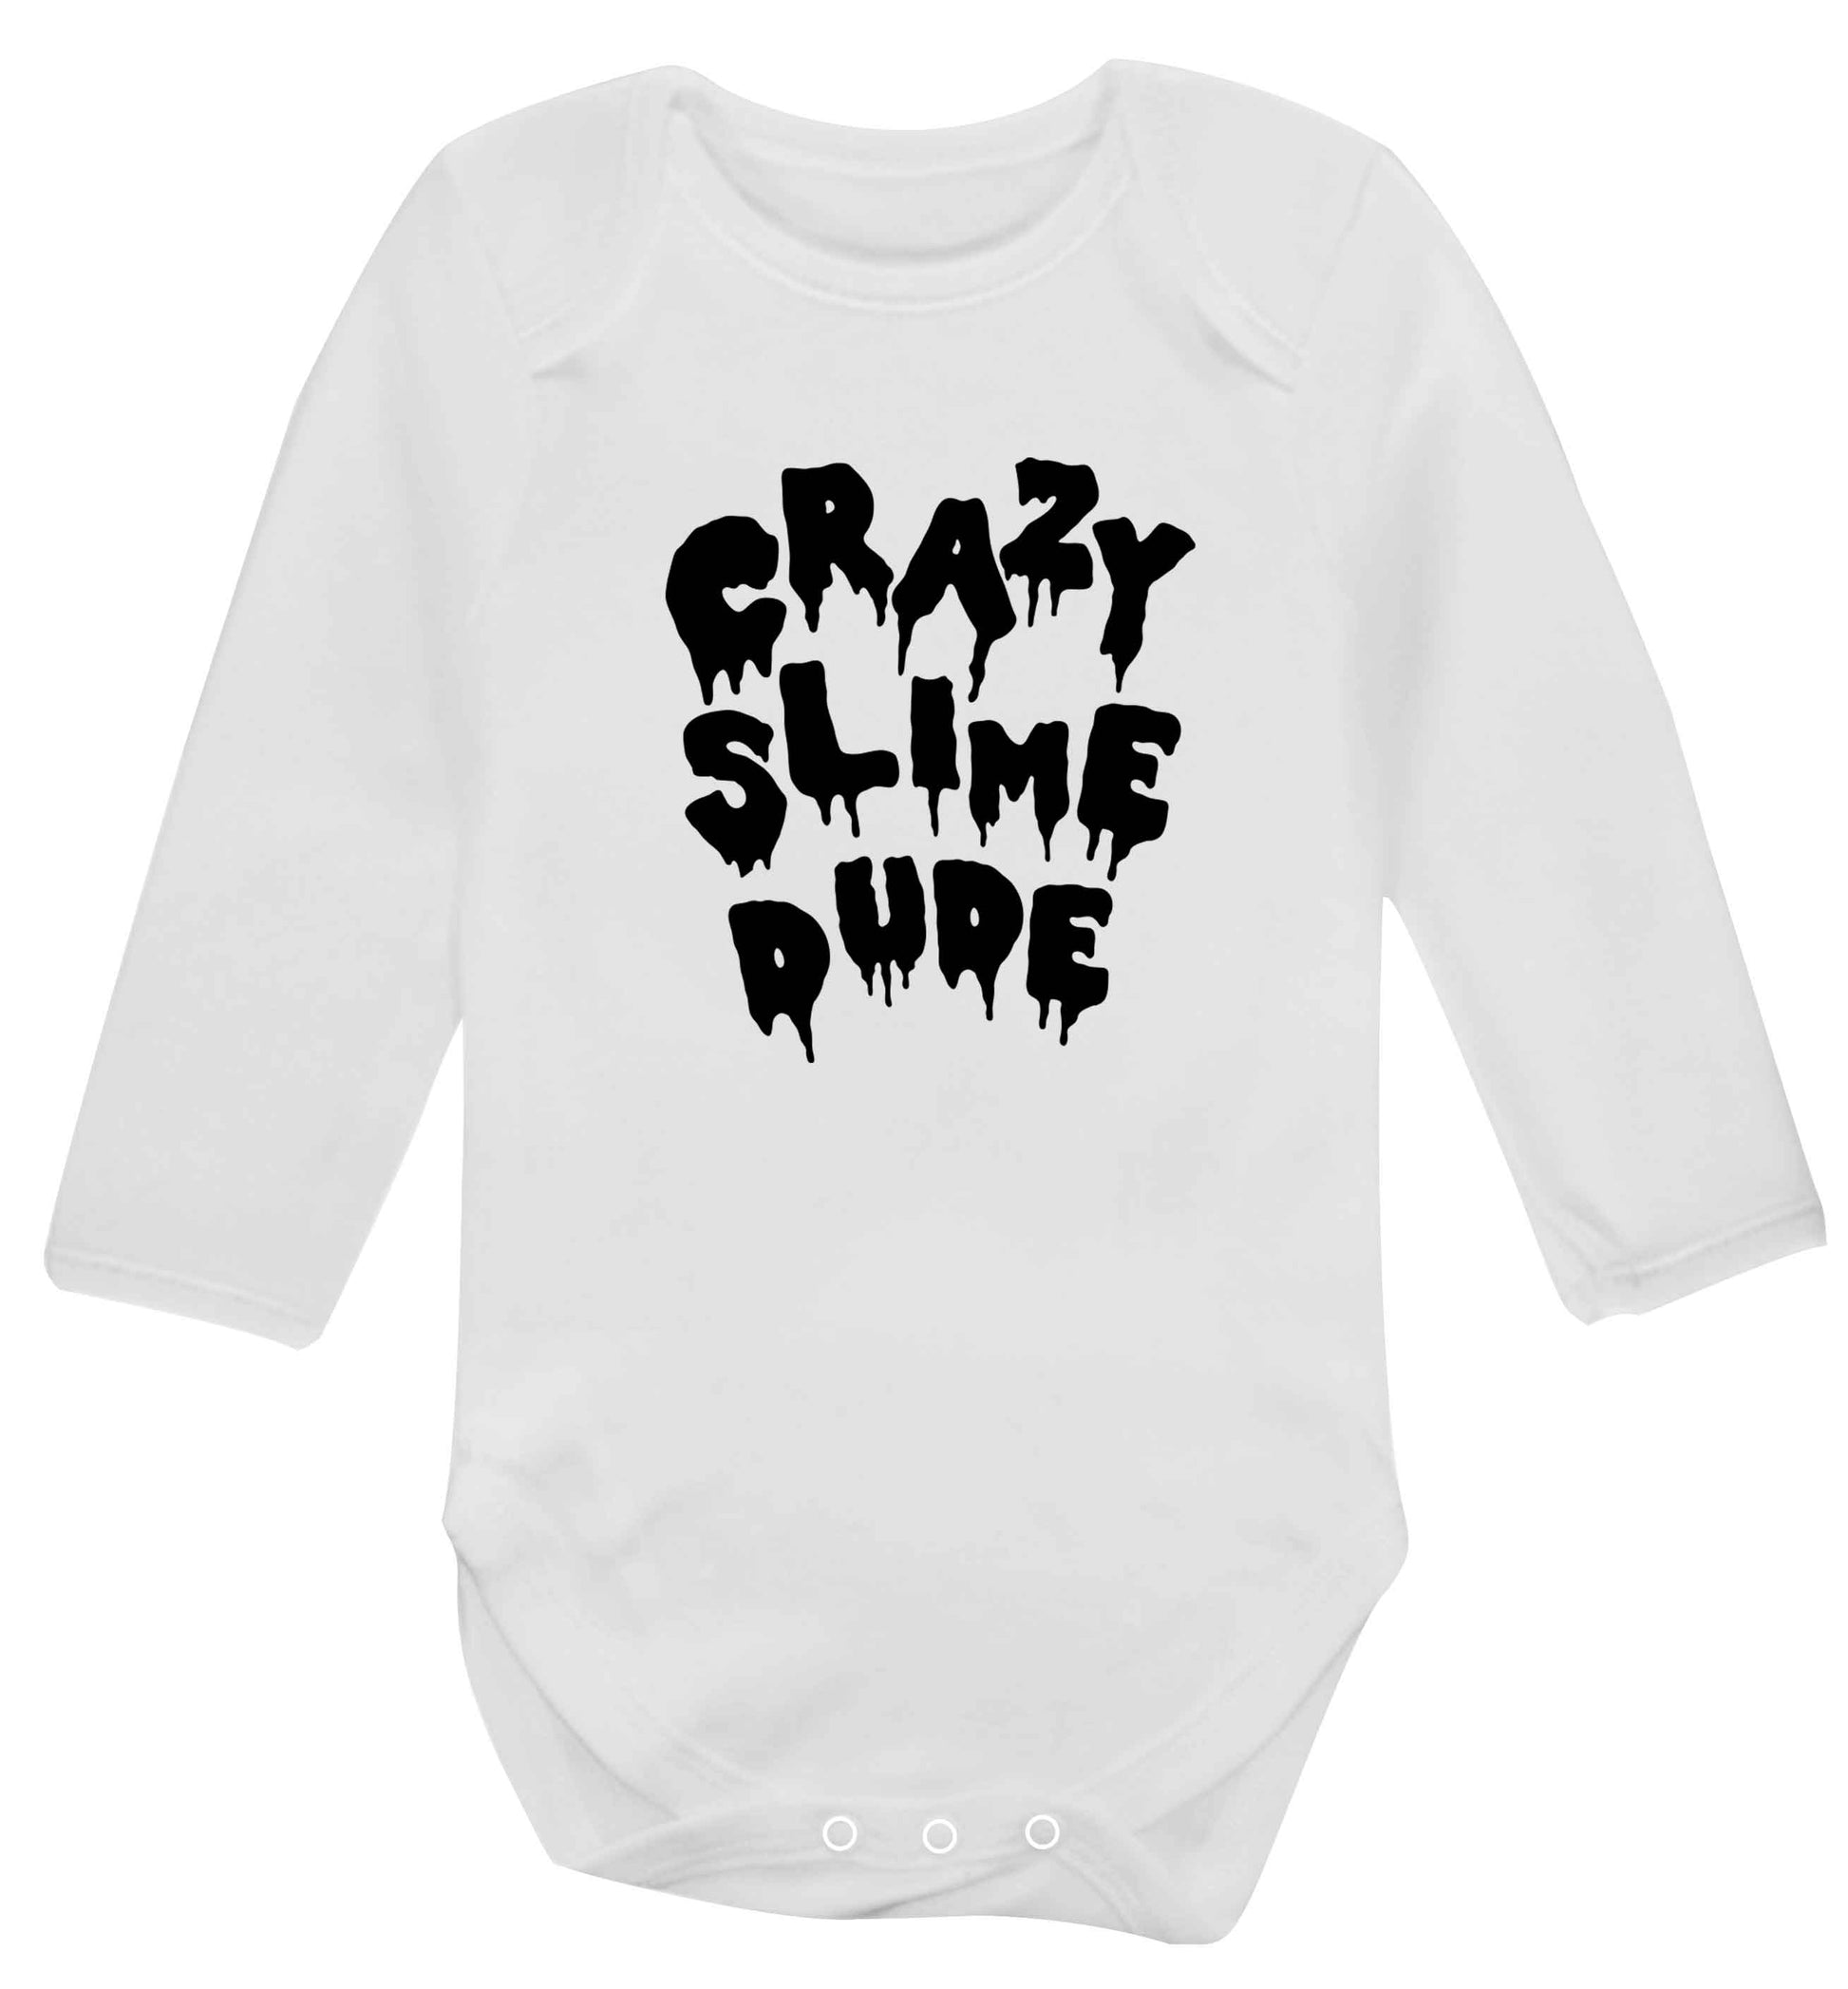 Crazy slime dude baby vest long sleeved white 6-12 months